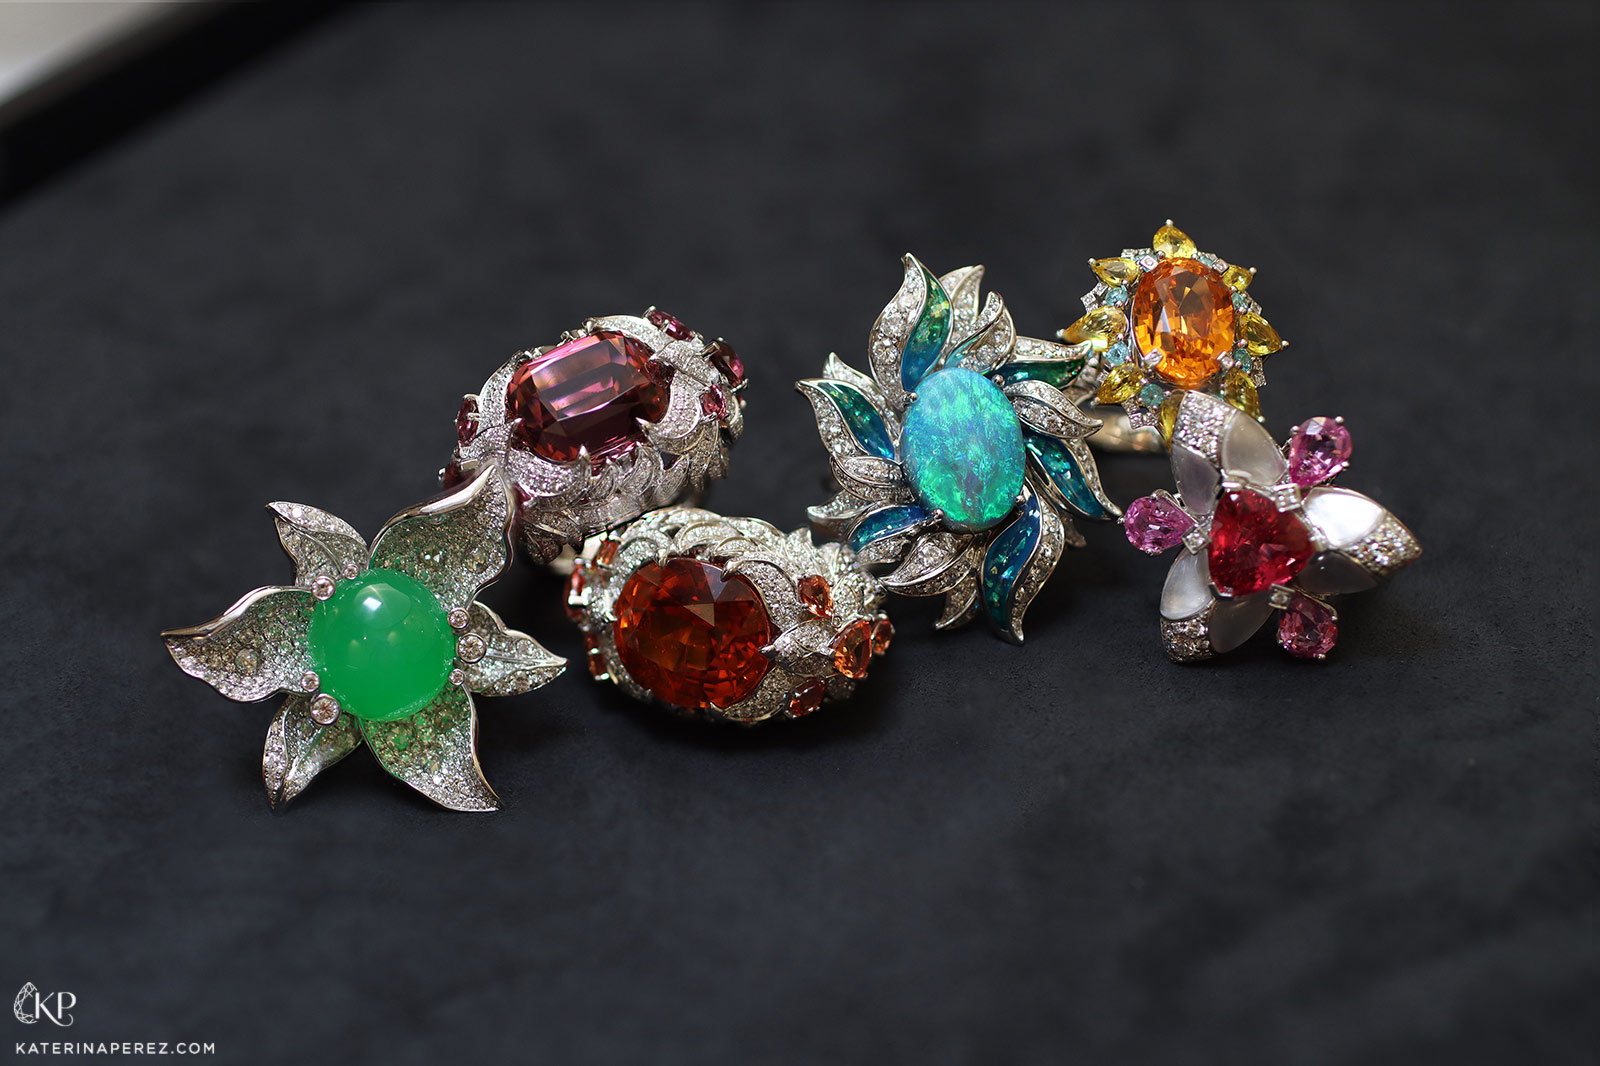 A selection of coloured gemstone cocktail rings by Serendipity Jewelry, based in Paris